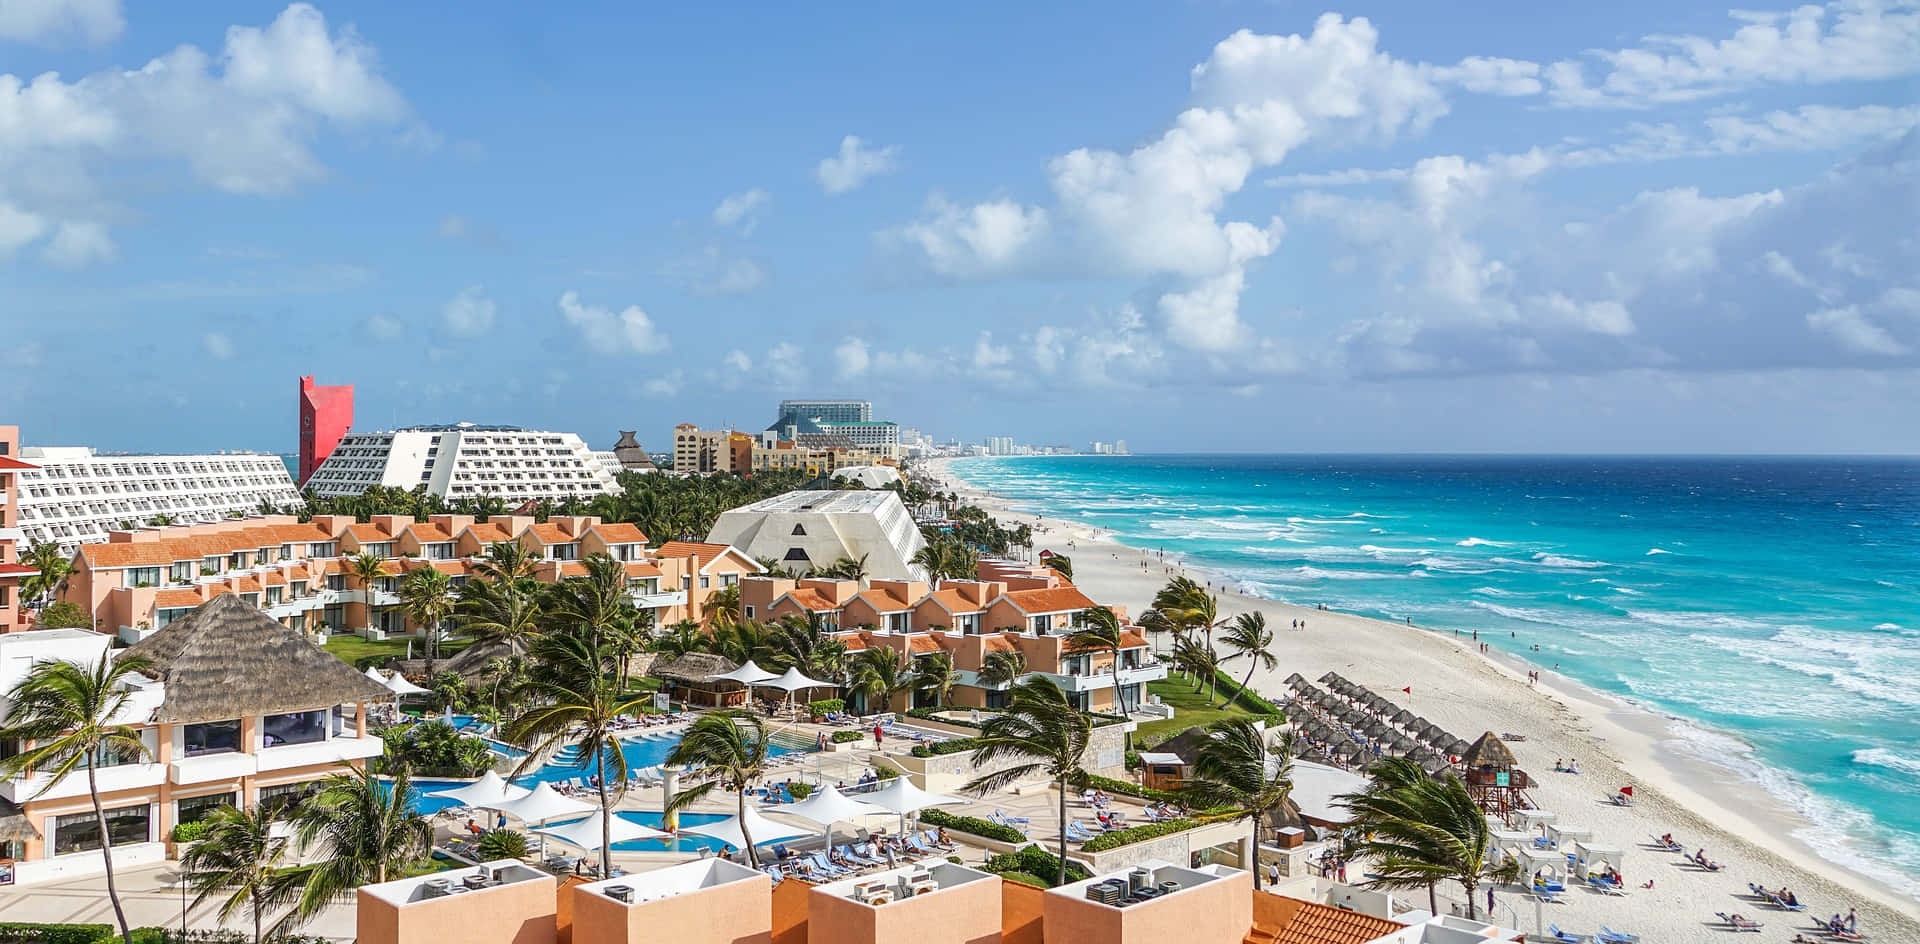 Cancun Pictures Wallpaper